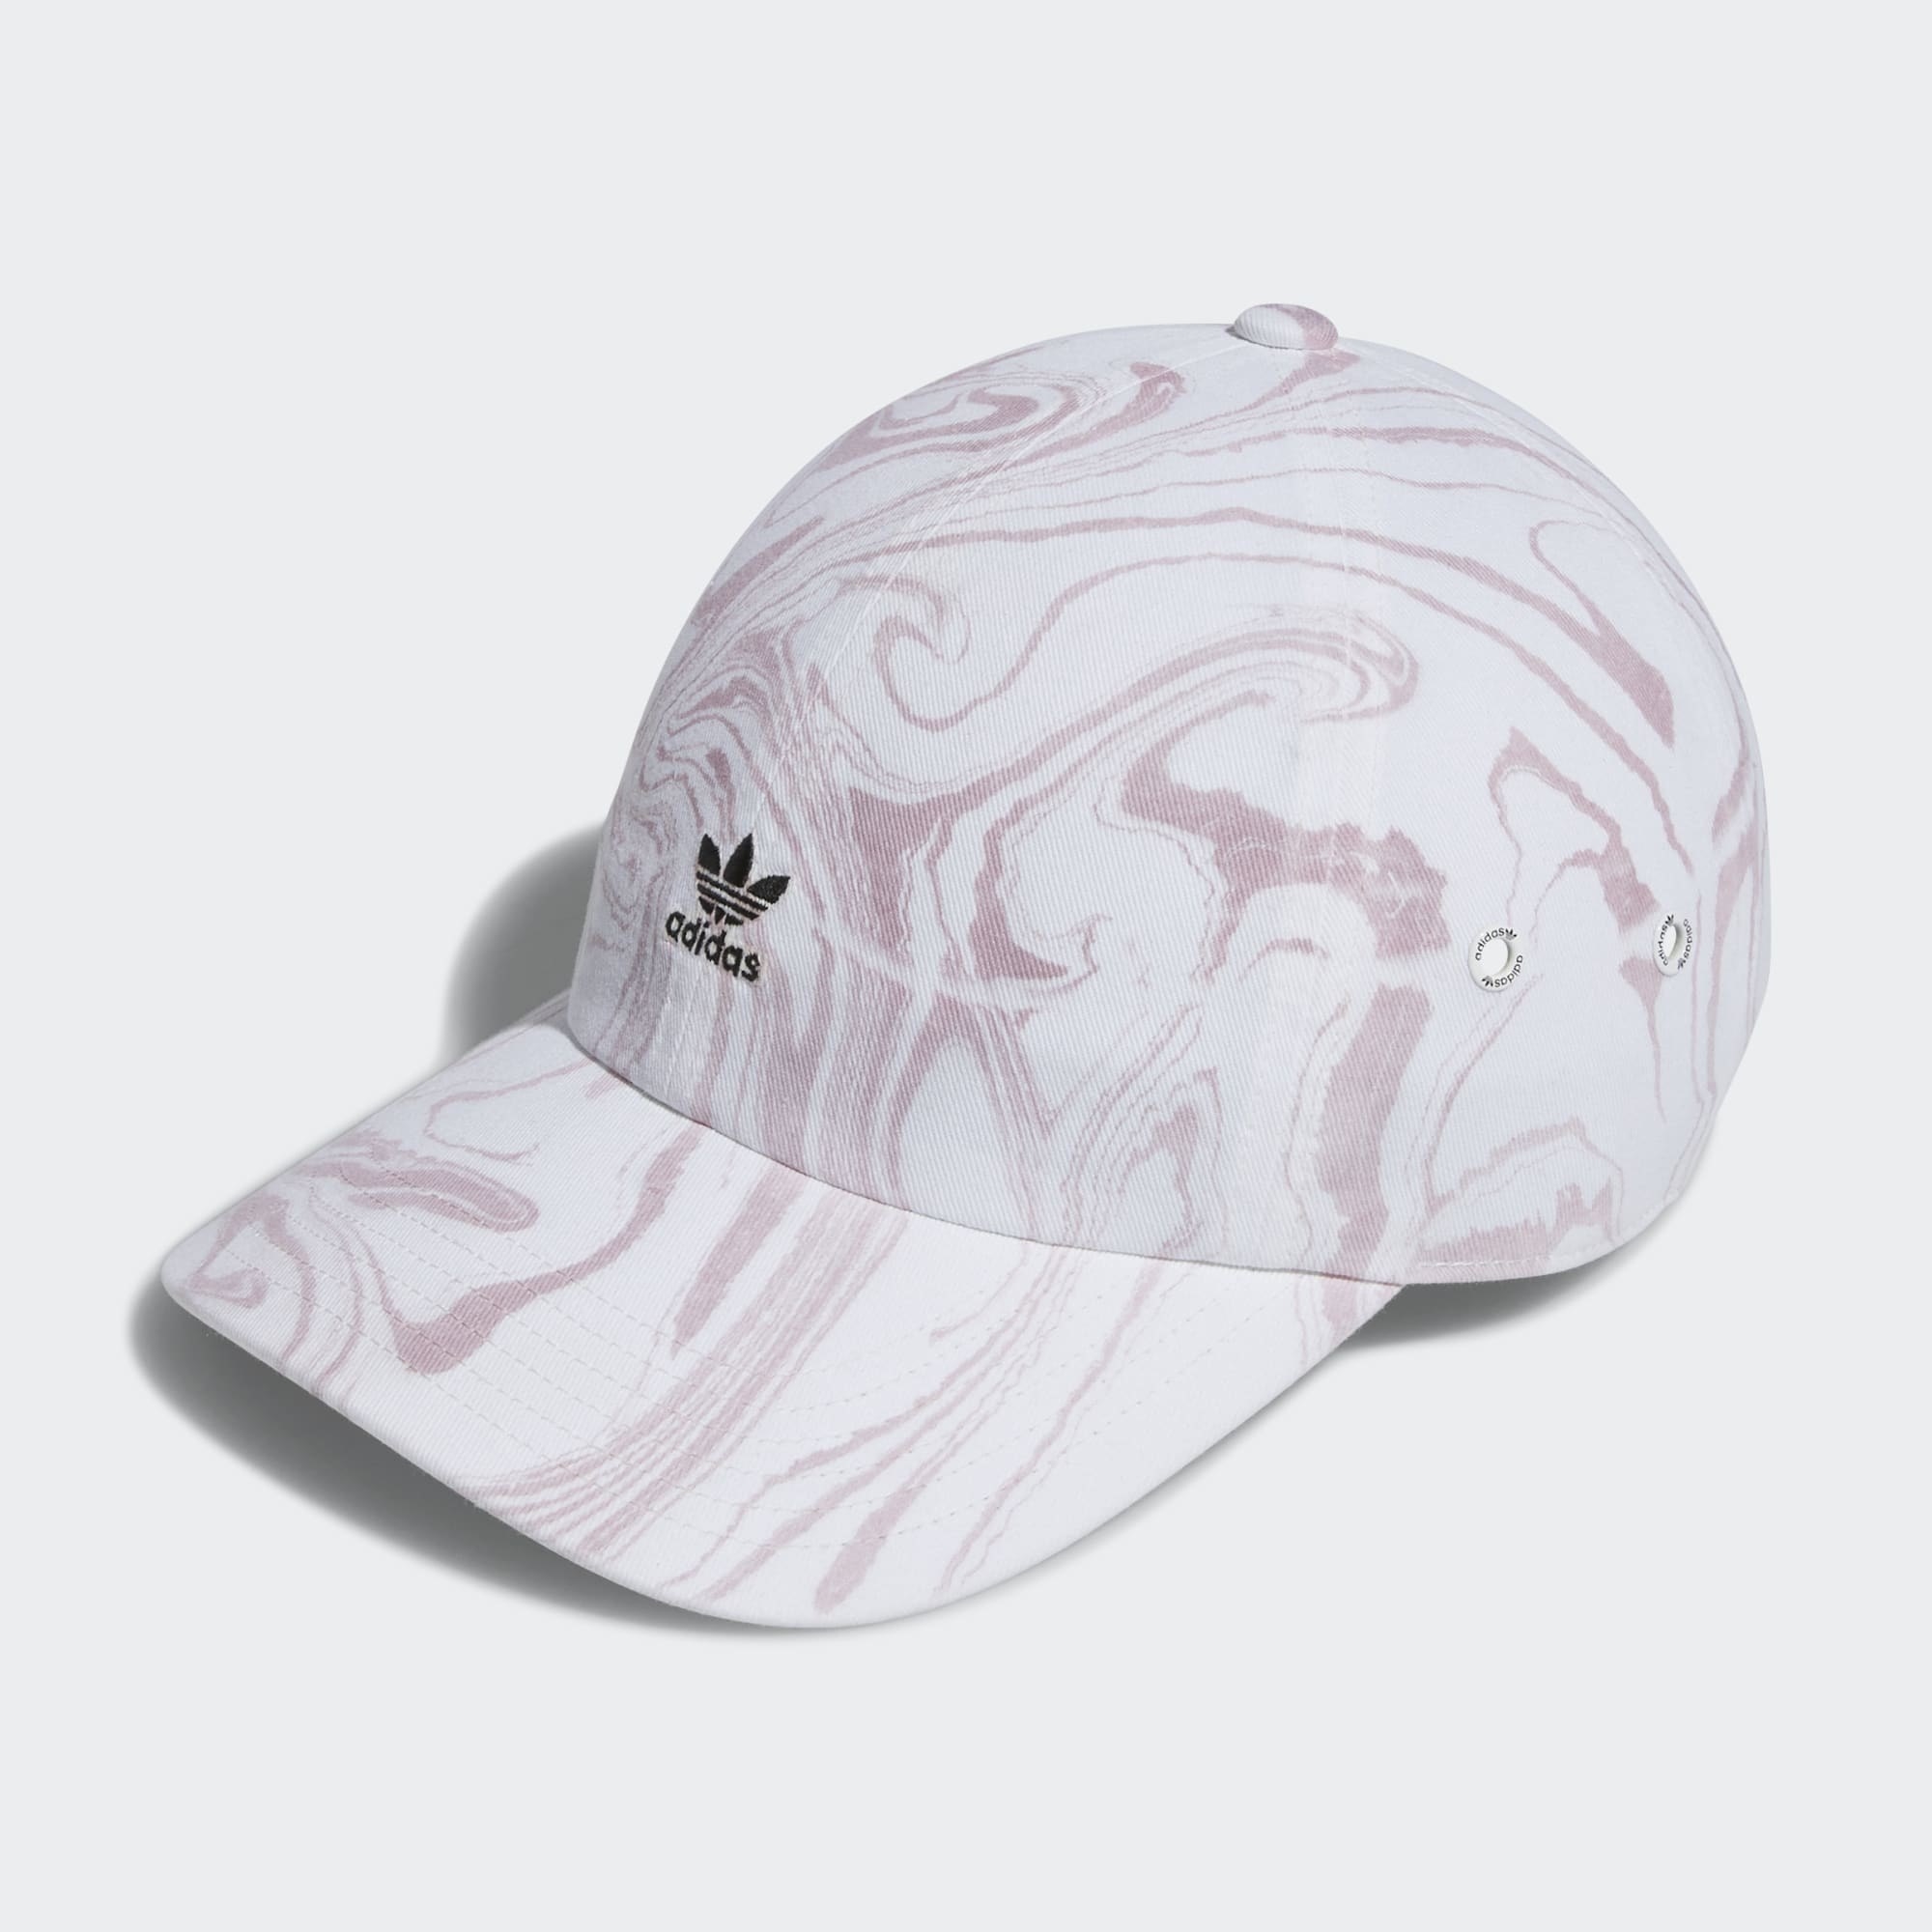 the pink and white marbleized hat